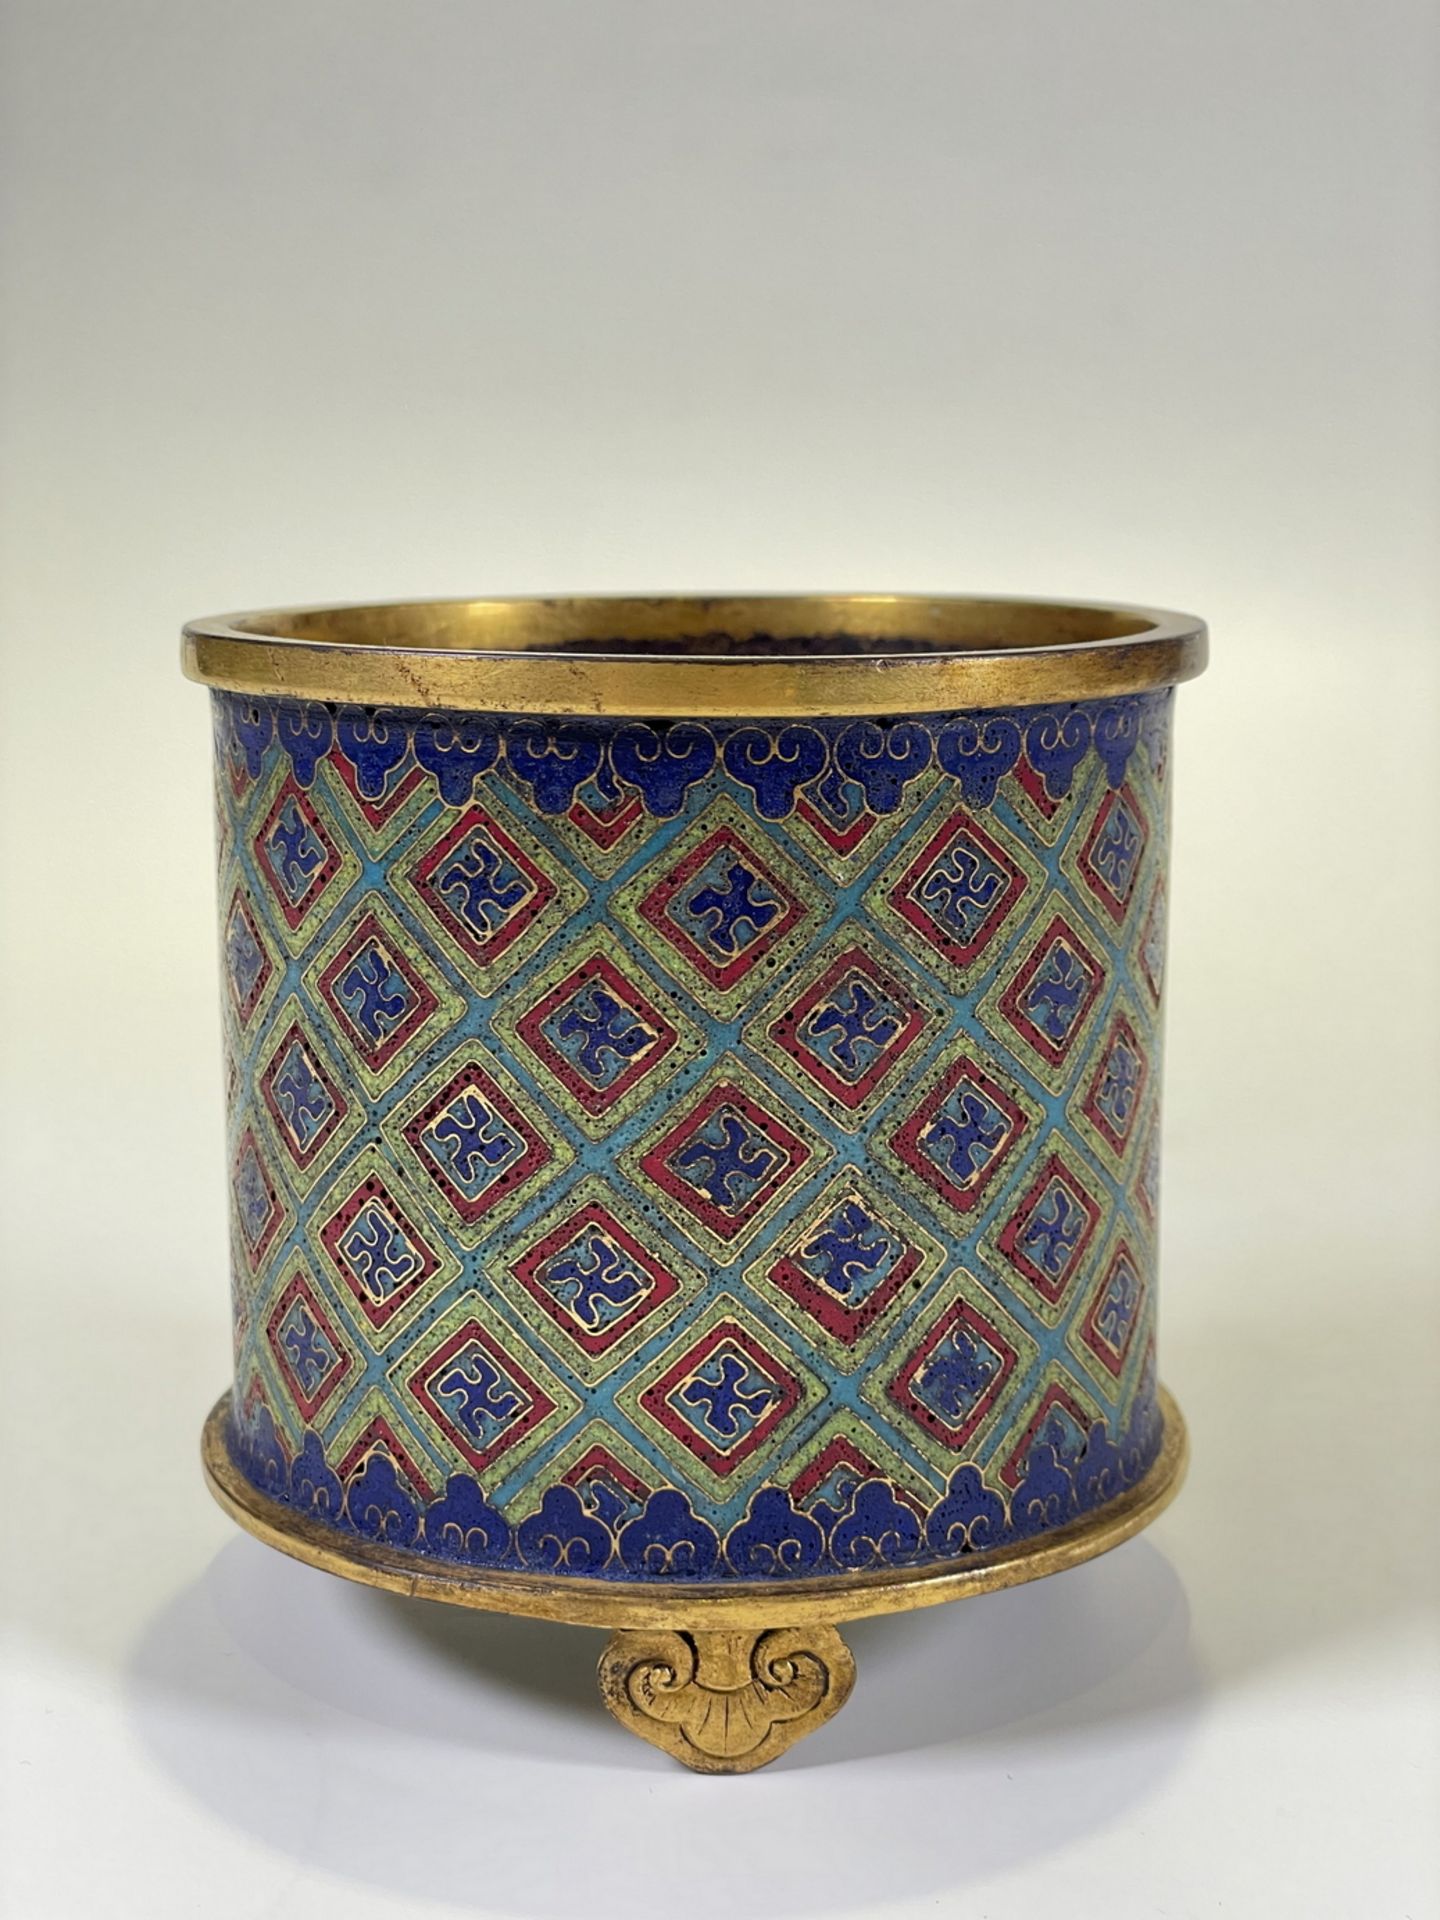 FINE CHINESE CLOISONNE, 18TH/19TH Century Pr. Collection of NARA private gallary.  - Image 2 of 11